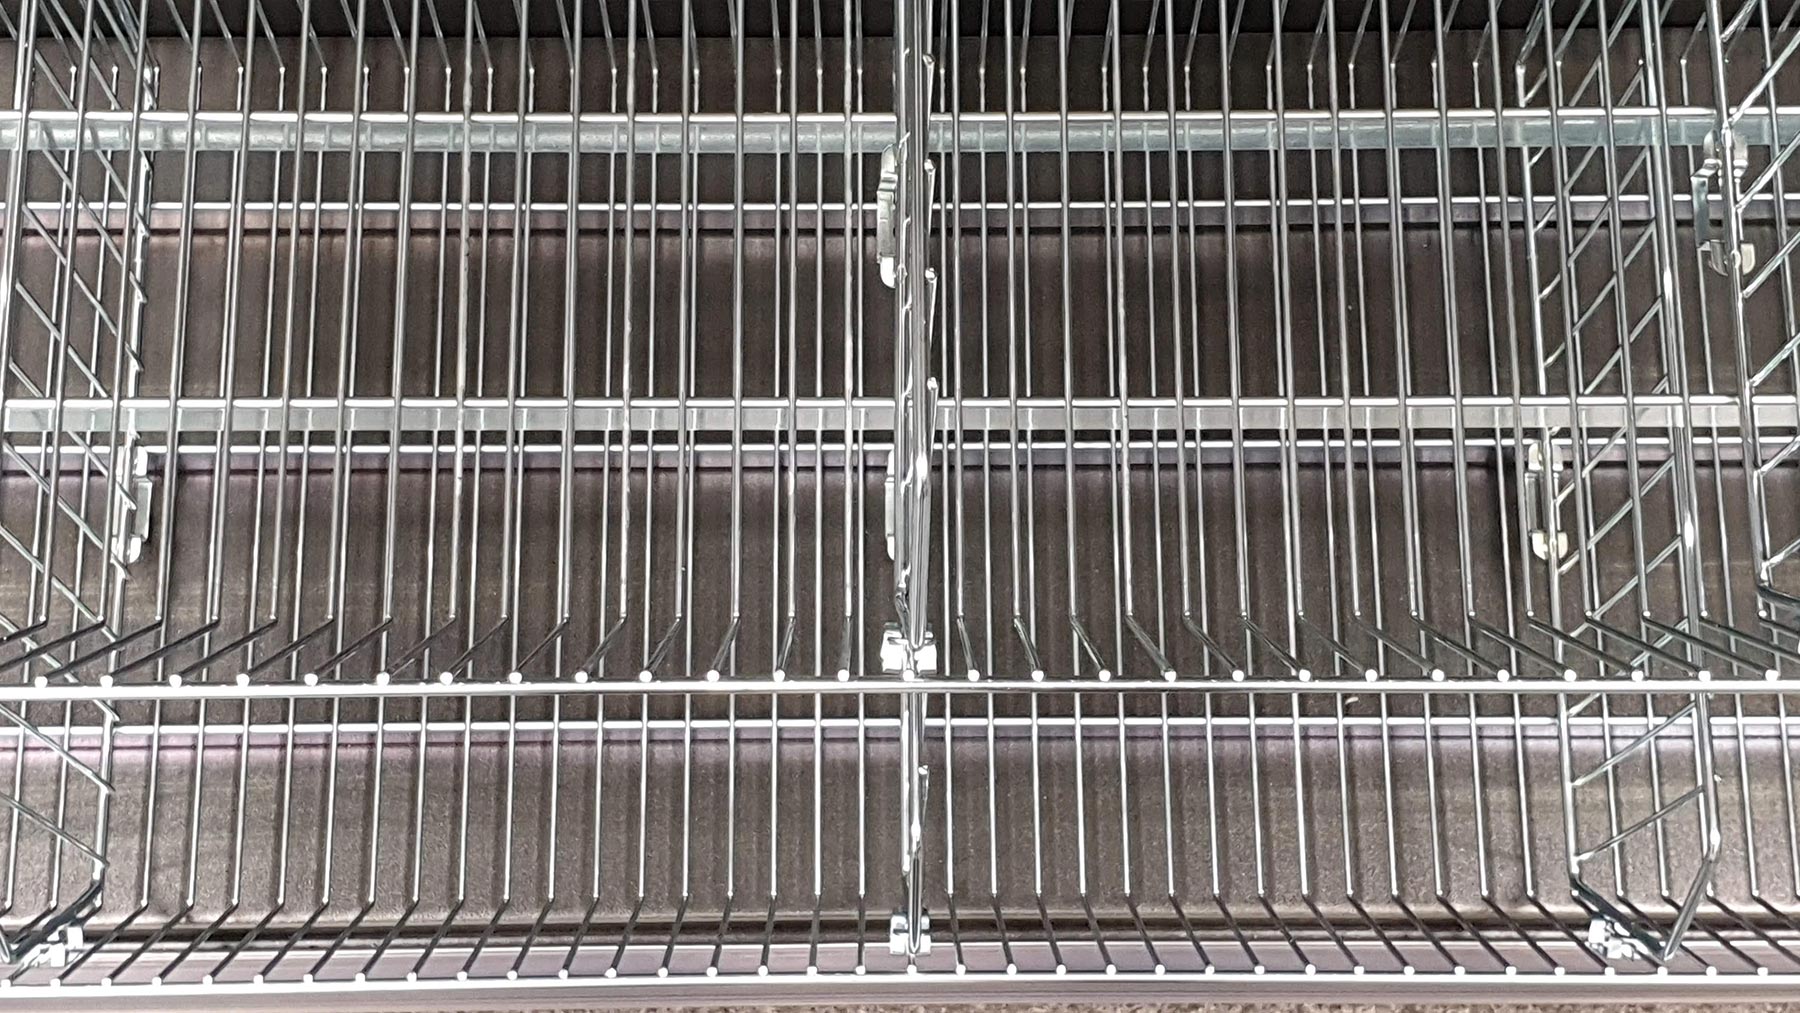 baskets for retail shelving